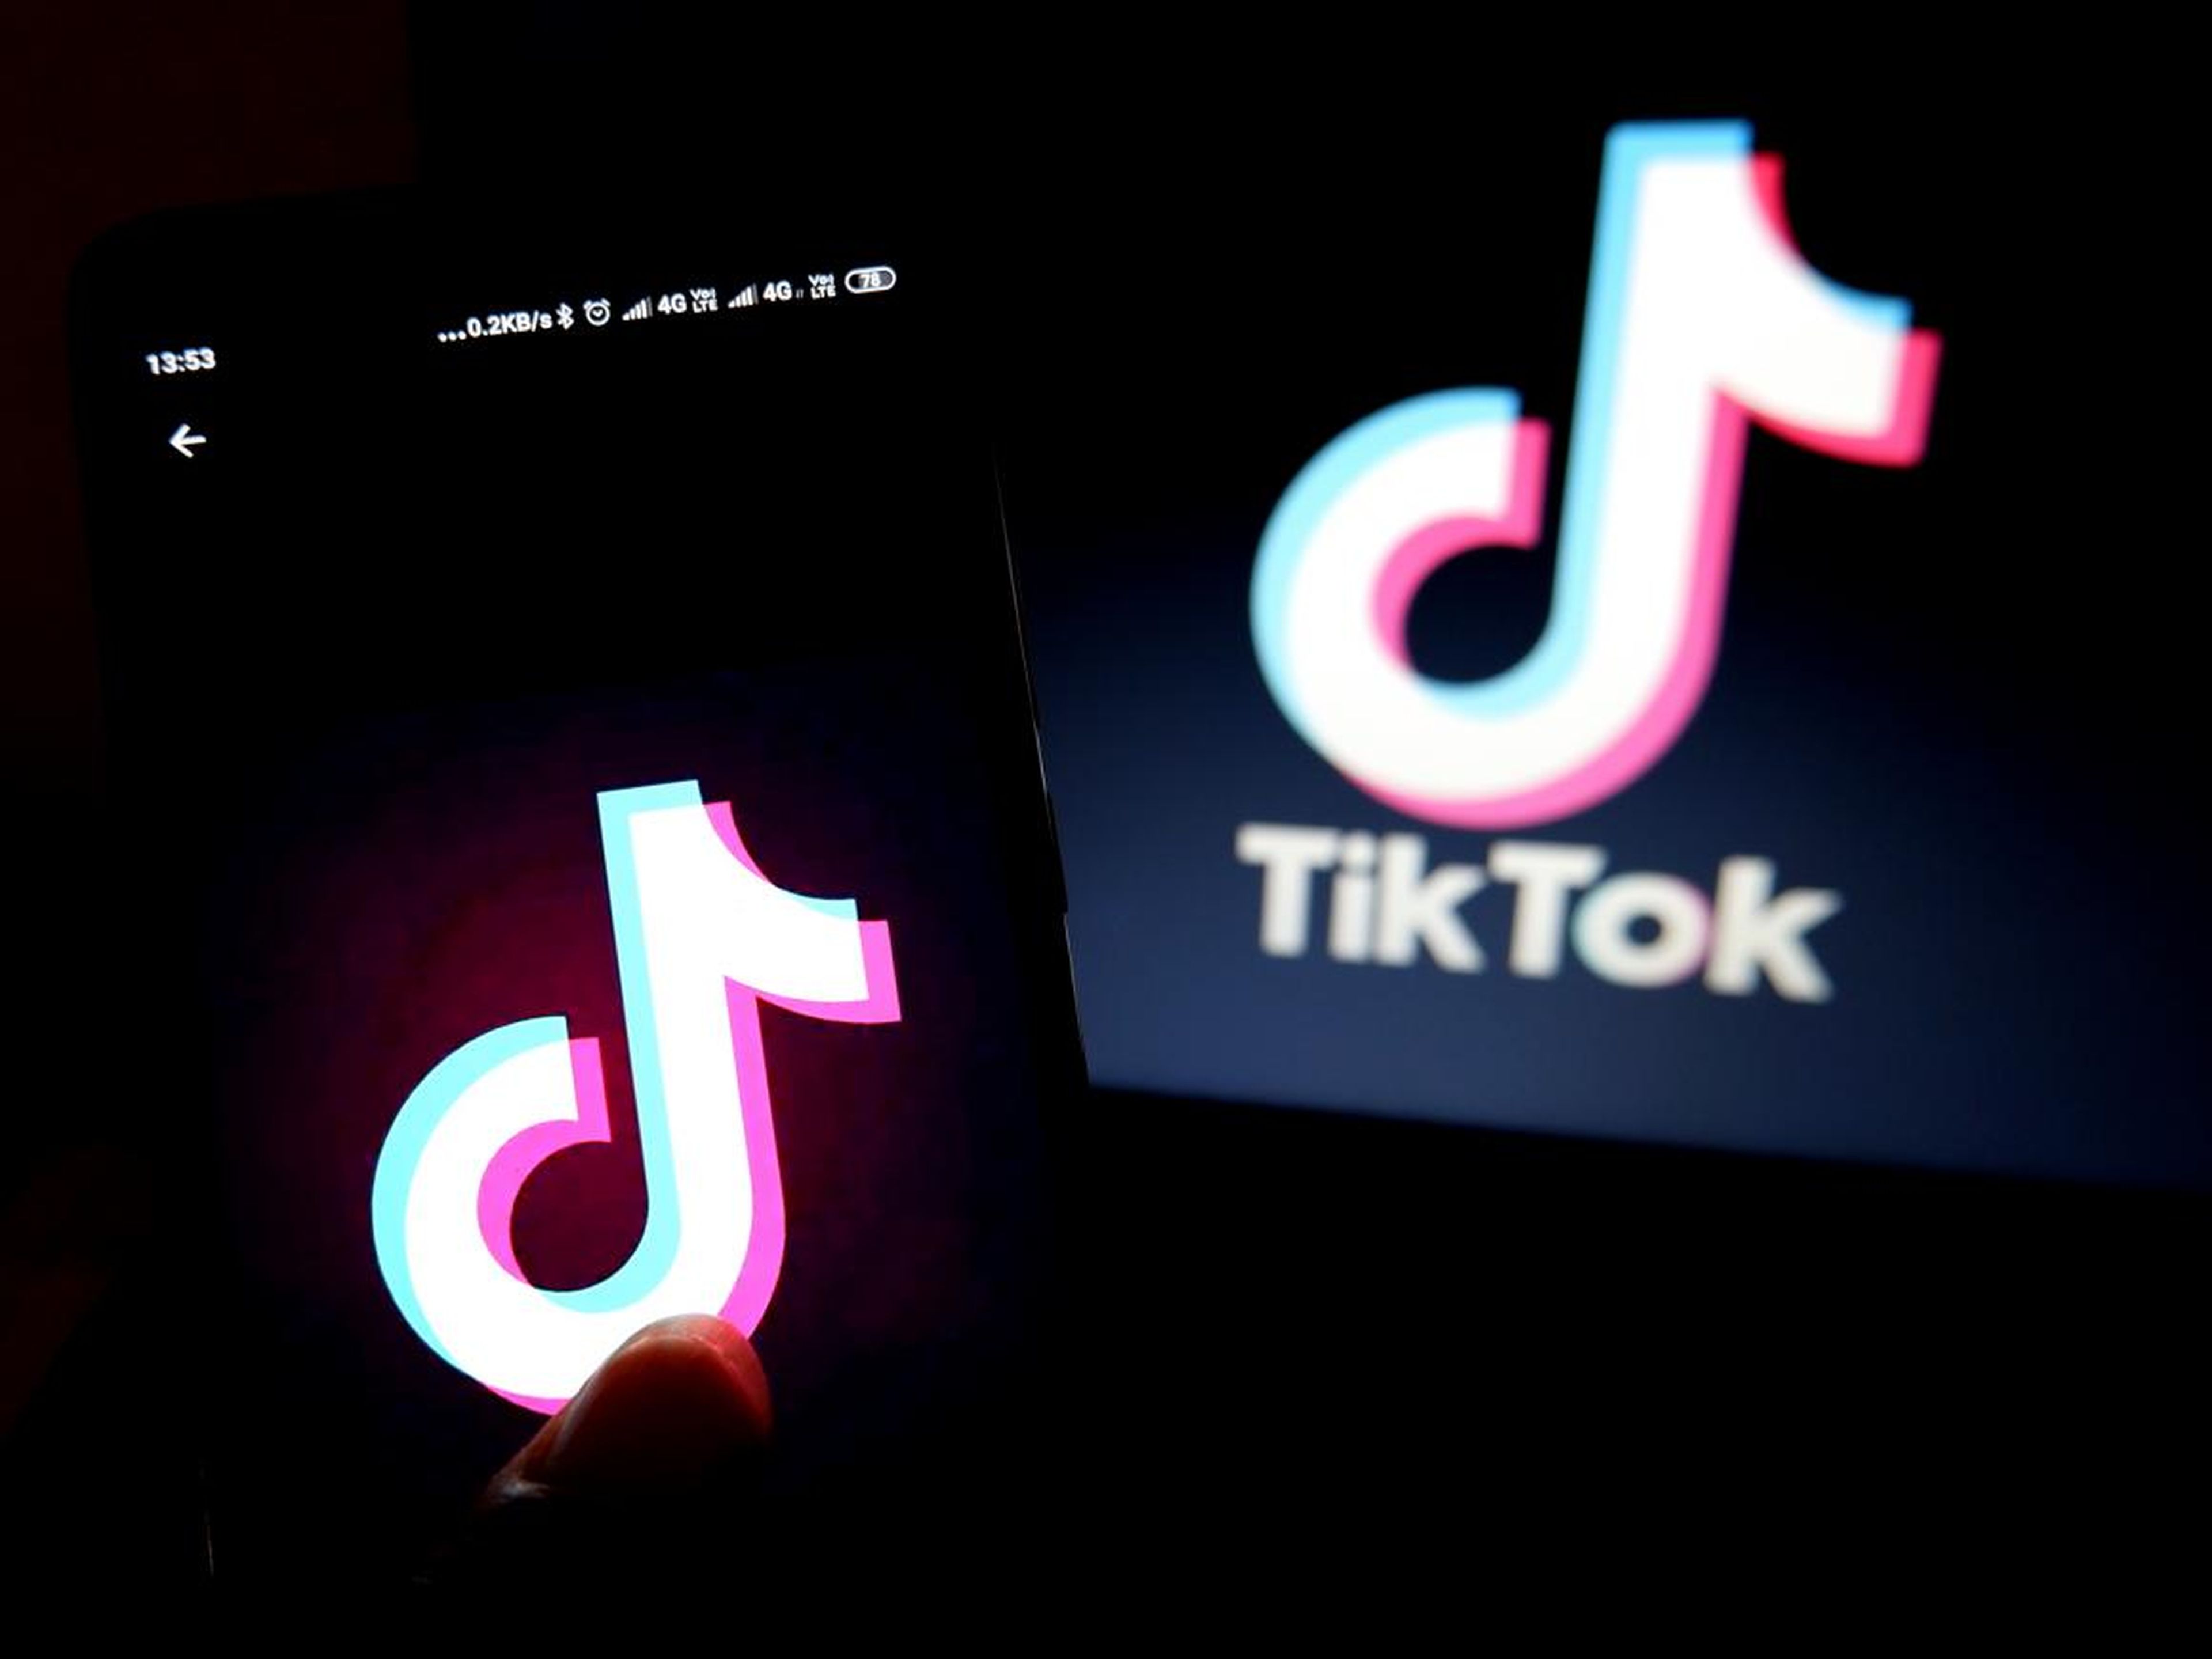 Internal documents showed TikTok censoring topics that would anger China